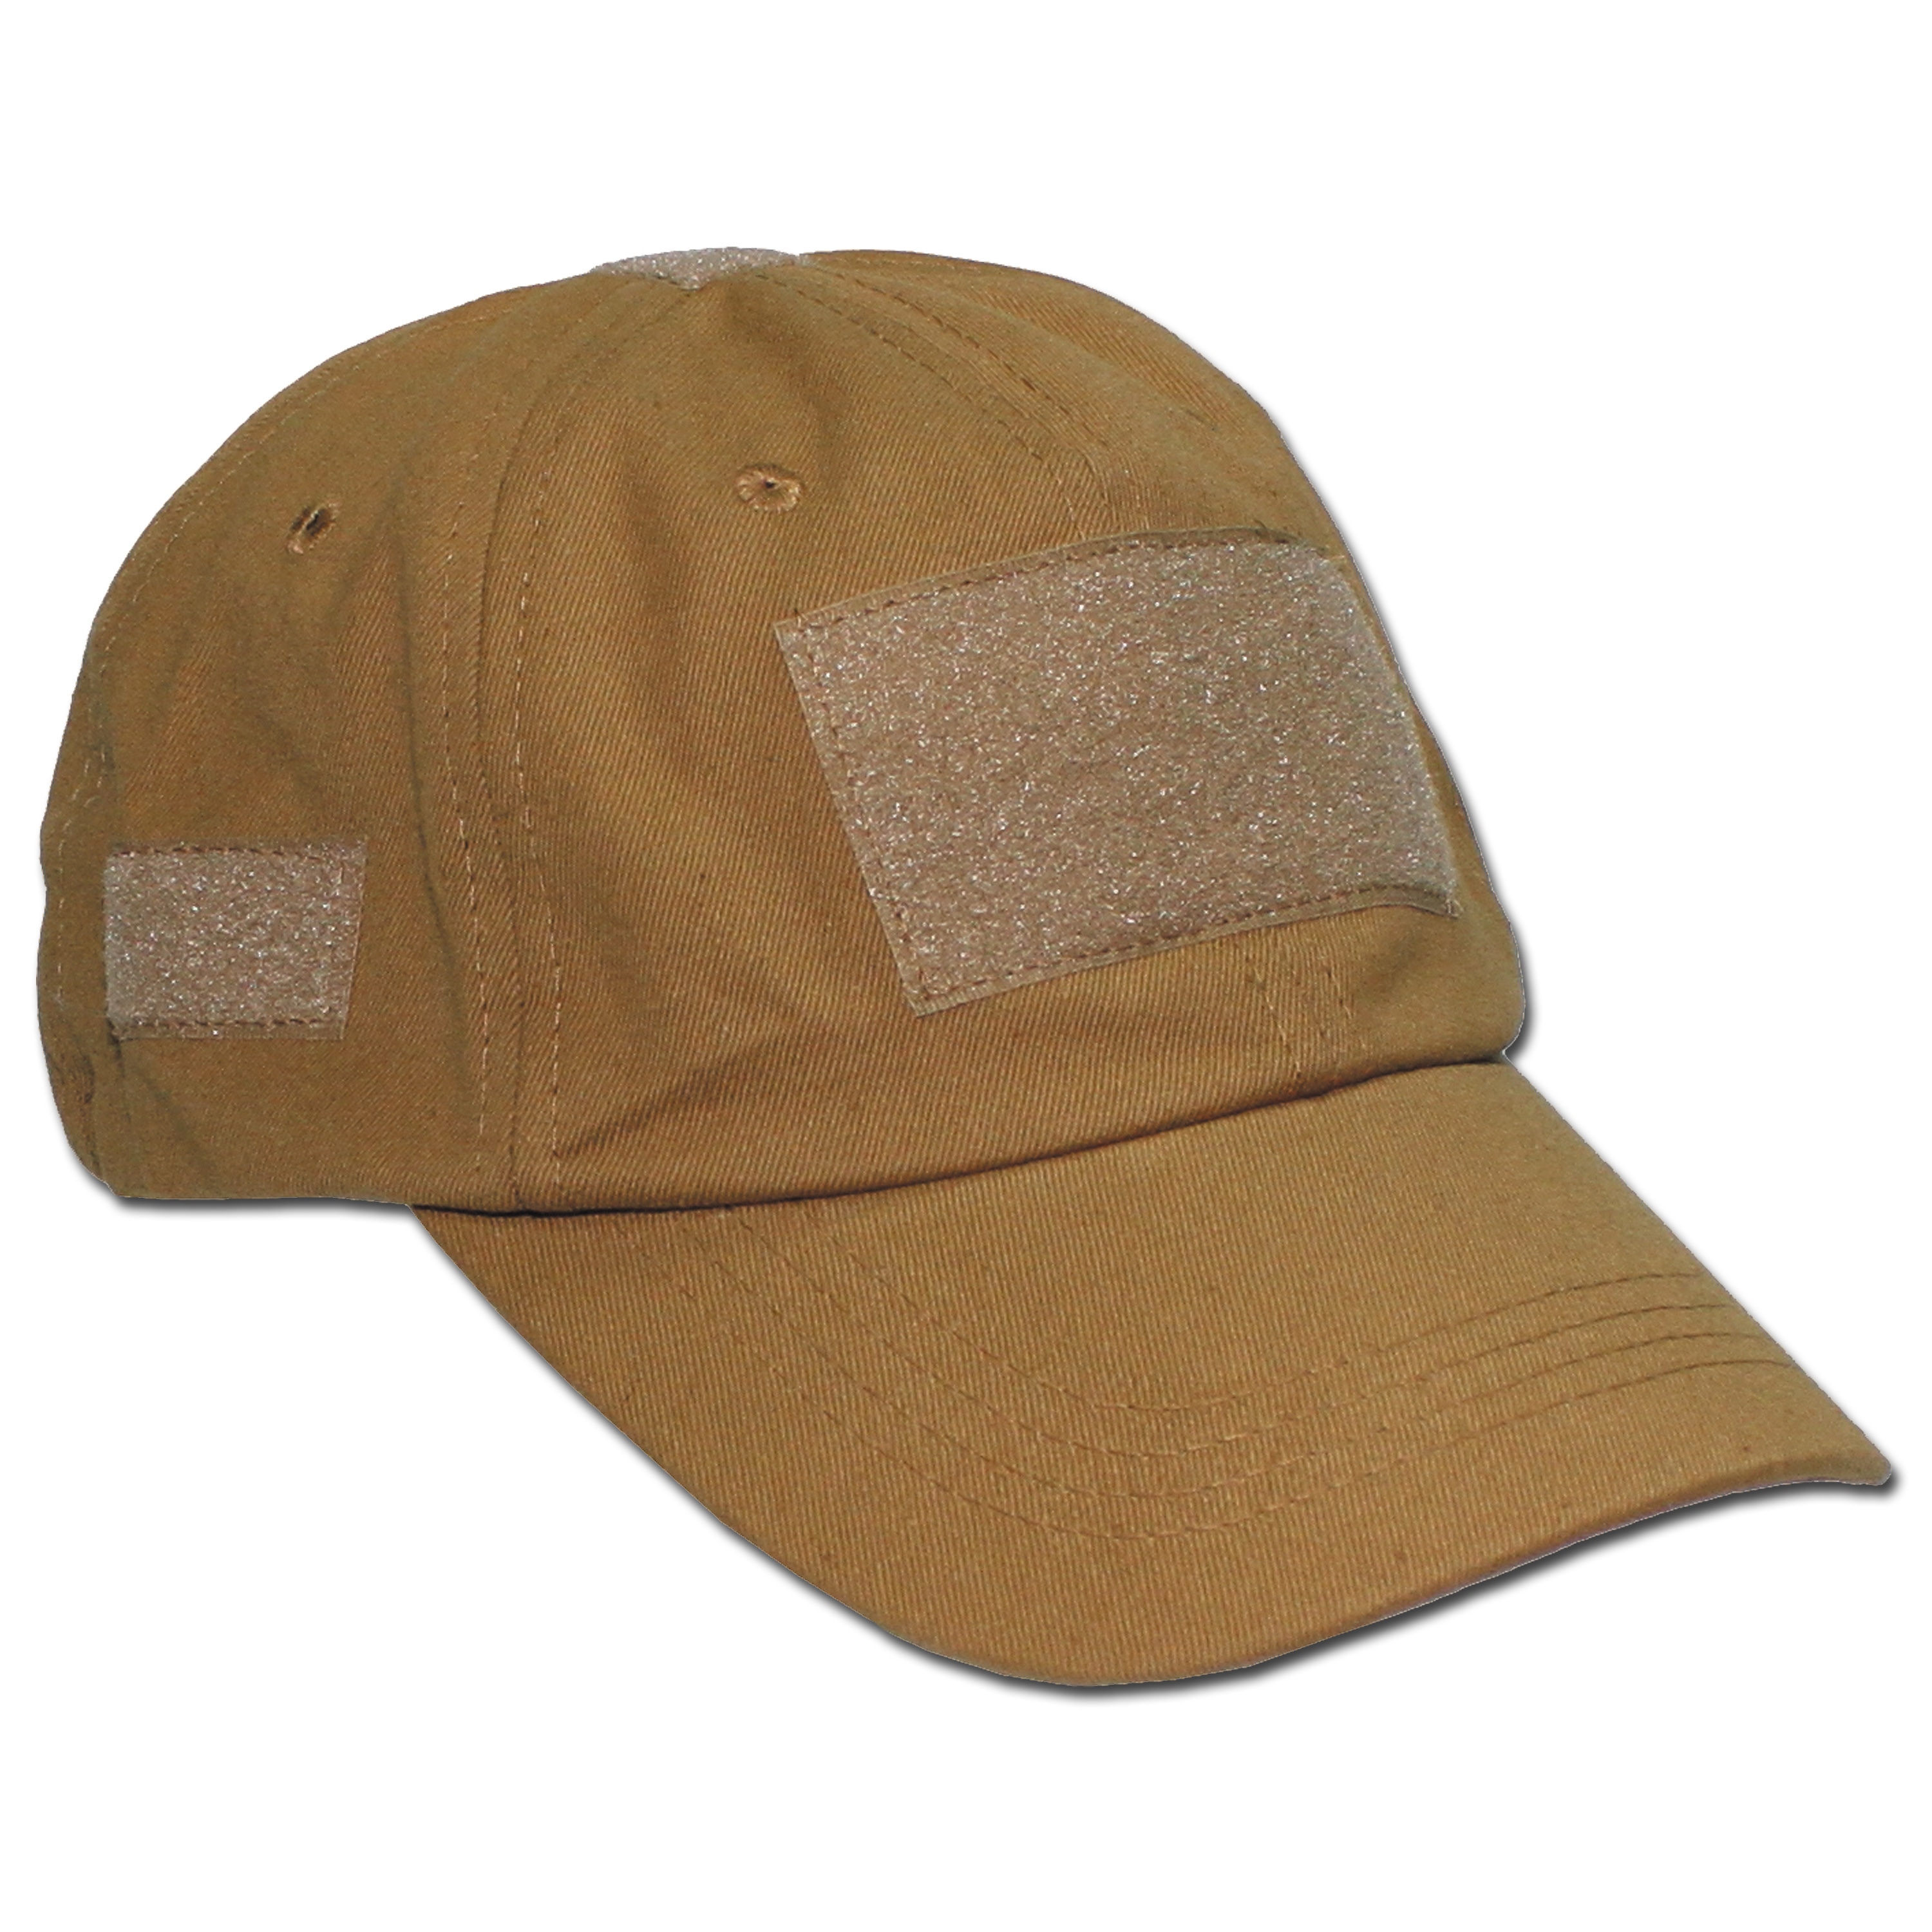 Operations Cap With Velcro Universal Size Coyote Operations Cap With Velcro Universal Size Coyote Baseball Caps Hats Head Gear Clothing